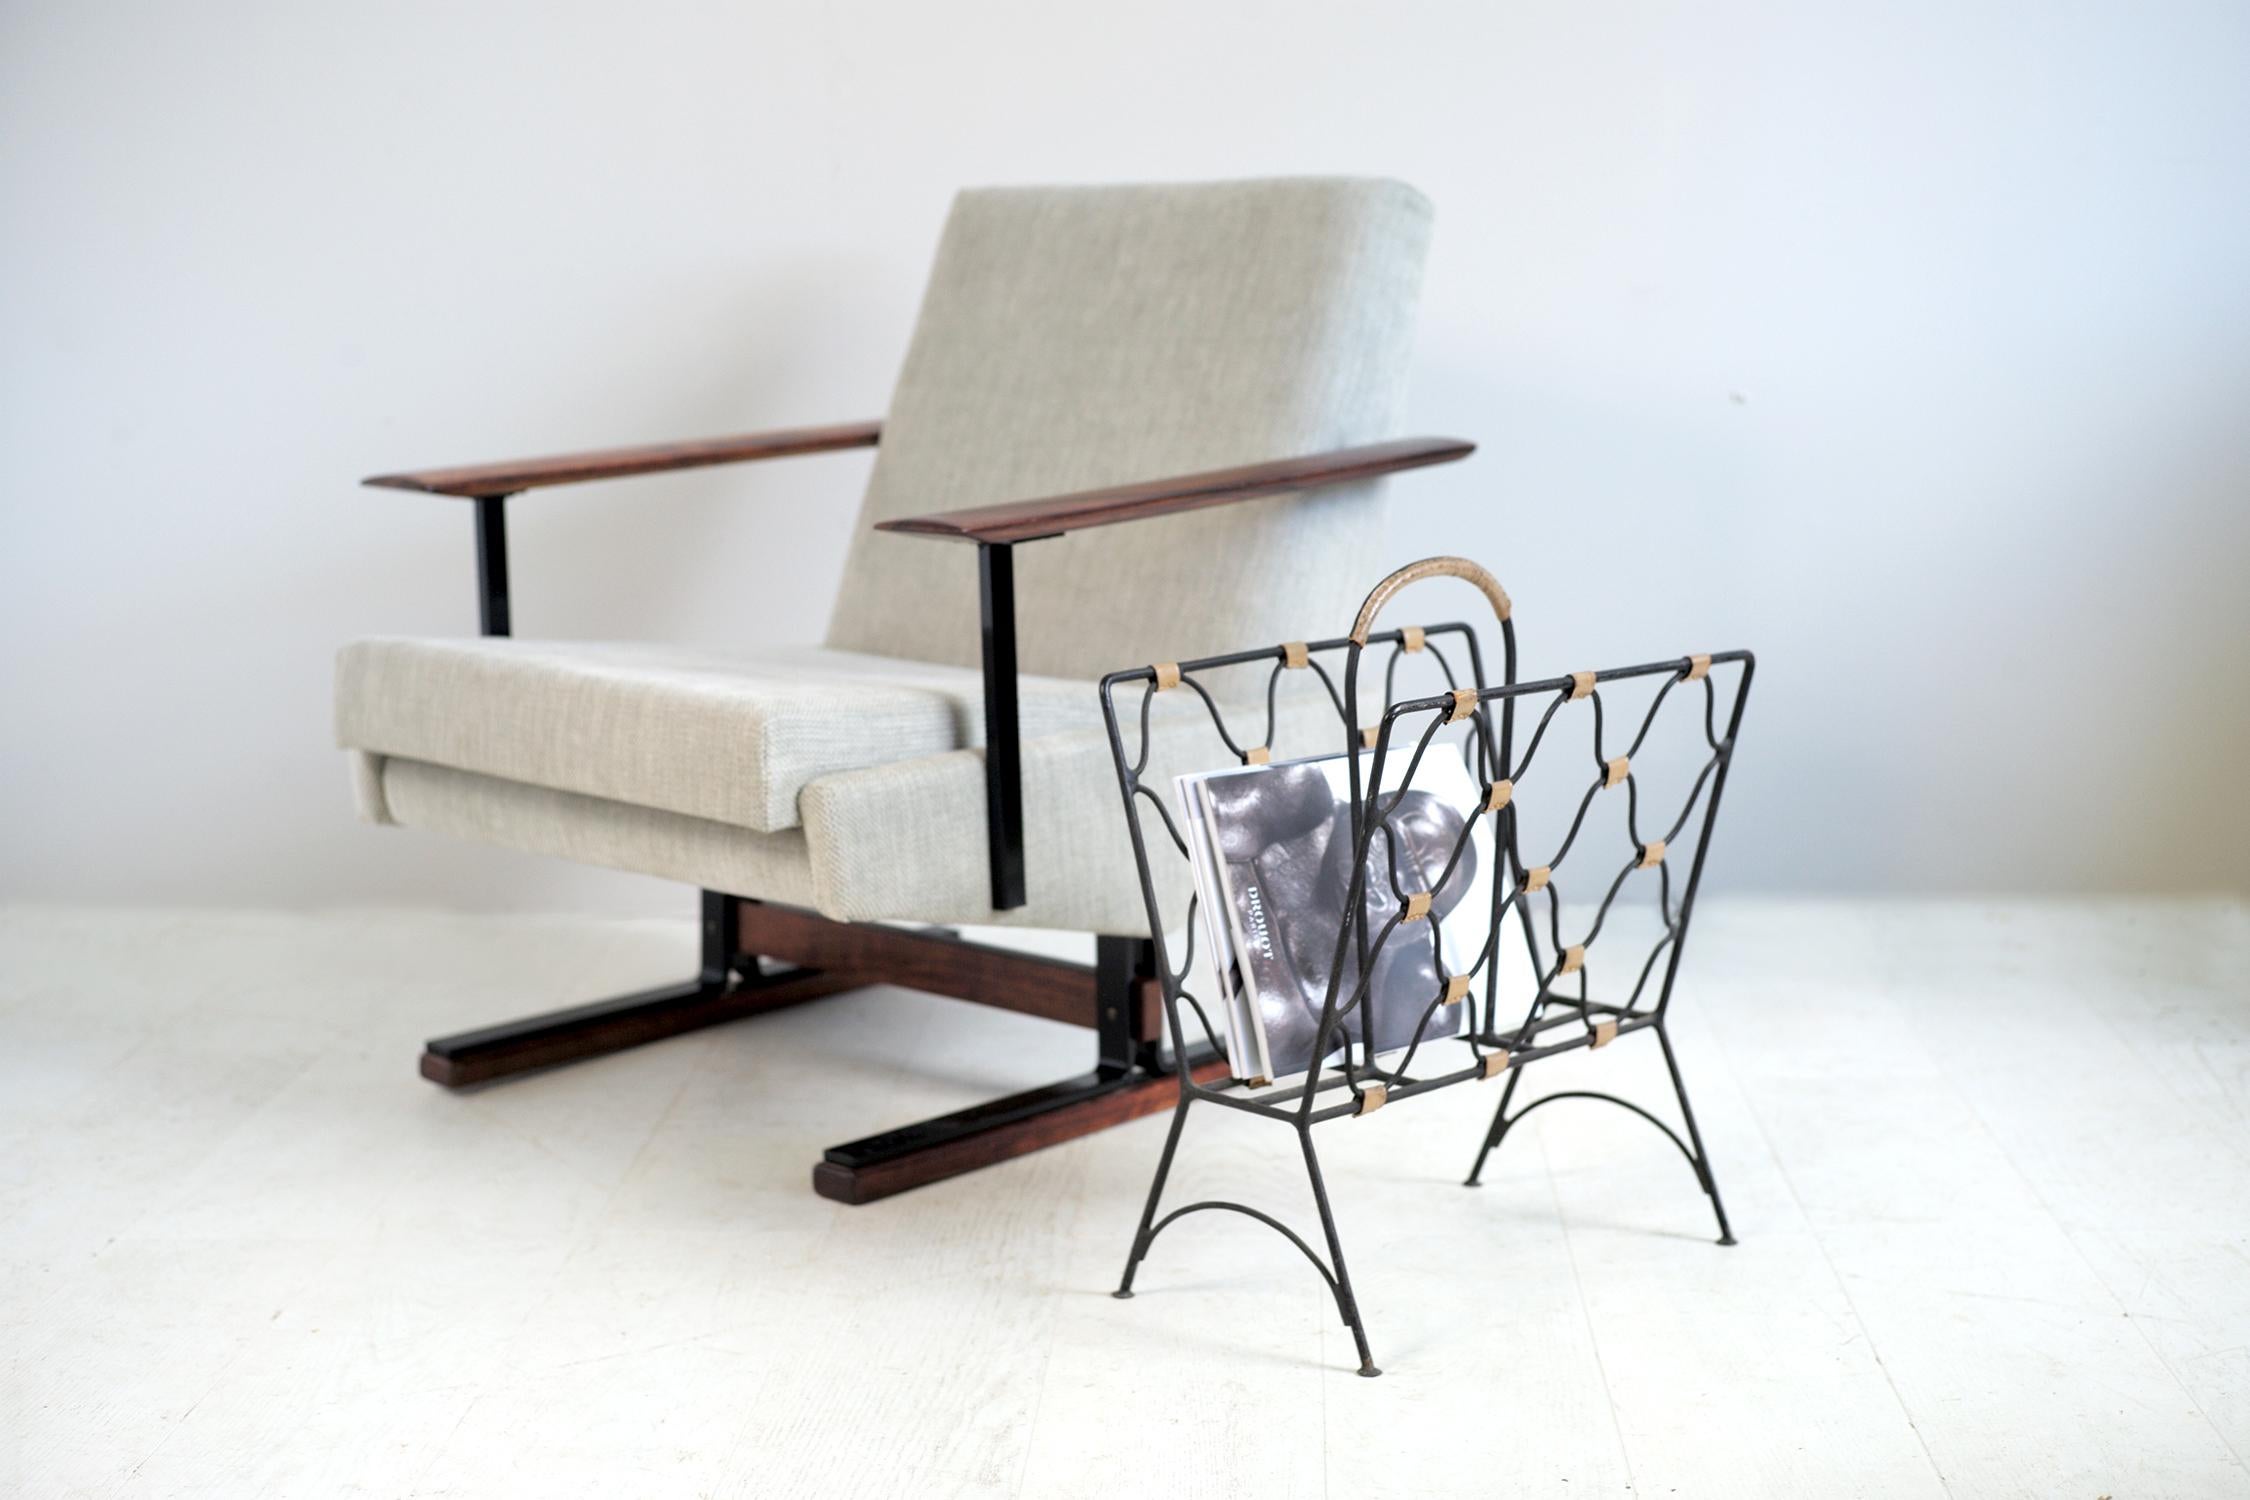 Black lacquered metal magazine rack with beige stitched leather by Jacques Adnet, France 1940.
Very good condition.